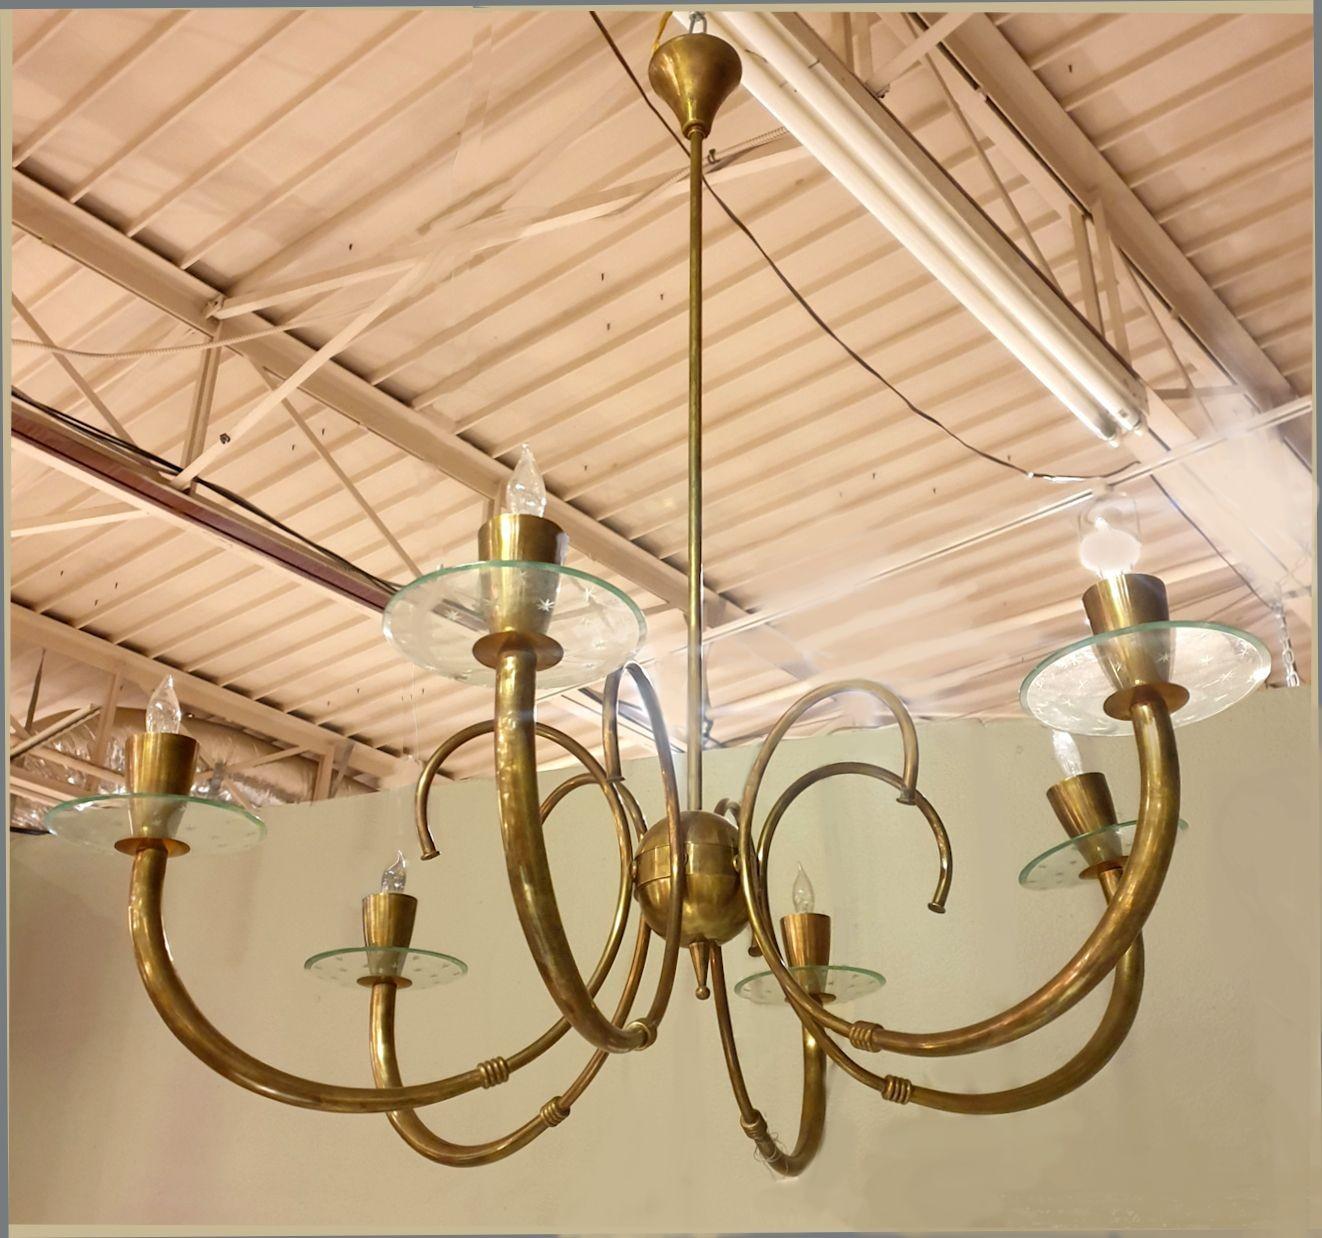 Mid century modern brass chandelier, Italy 1960s.
The large vintage chandelier is made of six arms/lights.
It's all brass, with clear etched glass bobeches. They have a carved little stars decor.
The chandelier has been rewired for the US, with